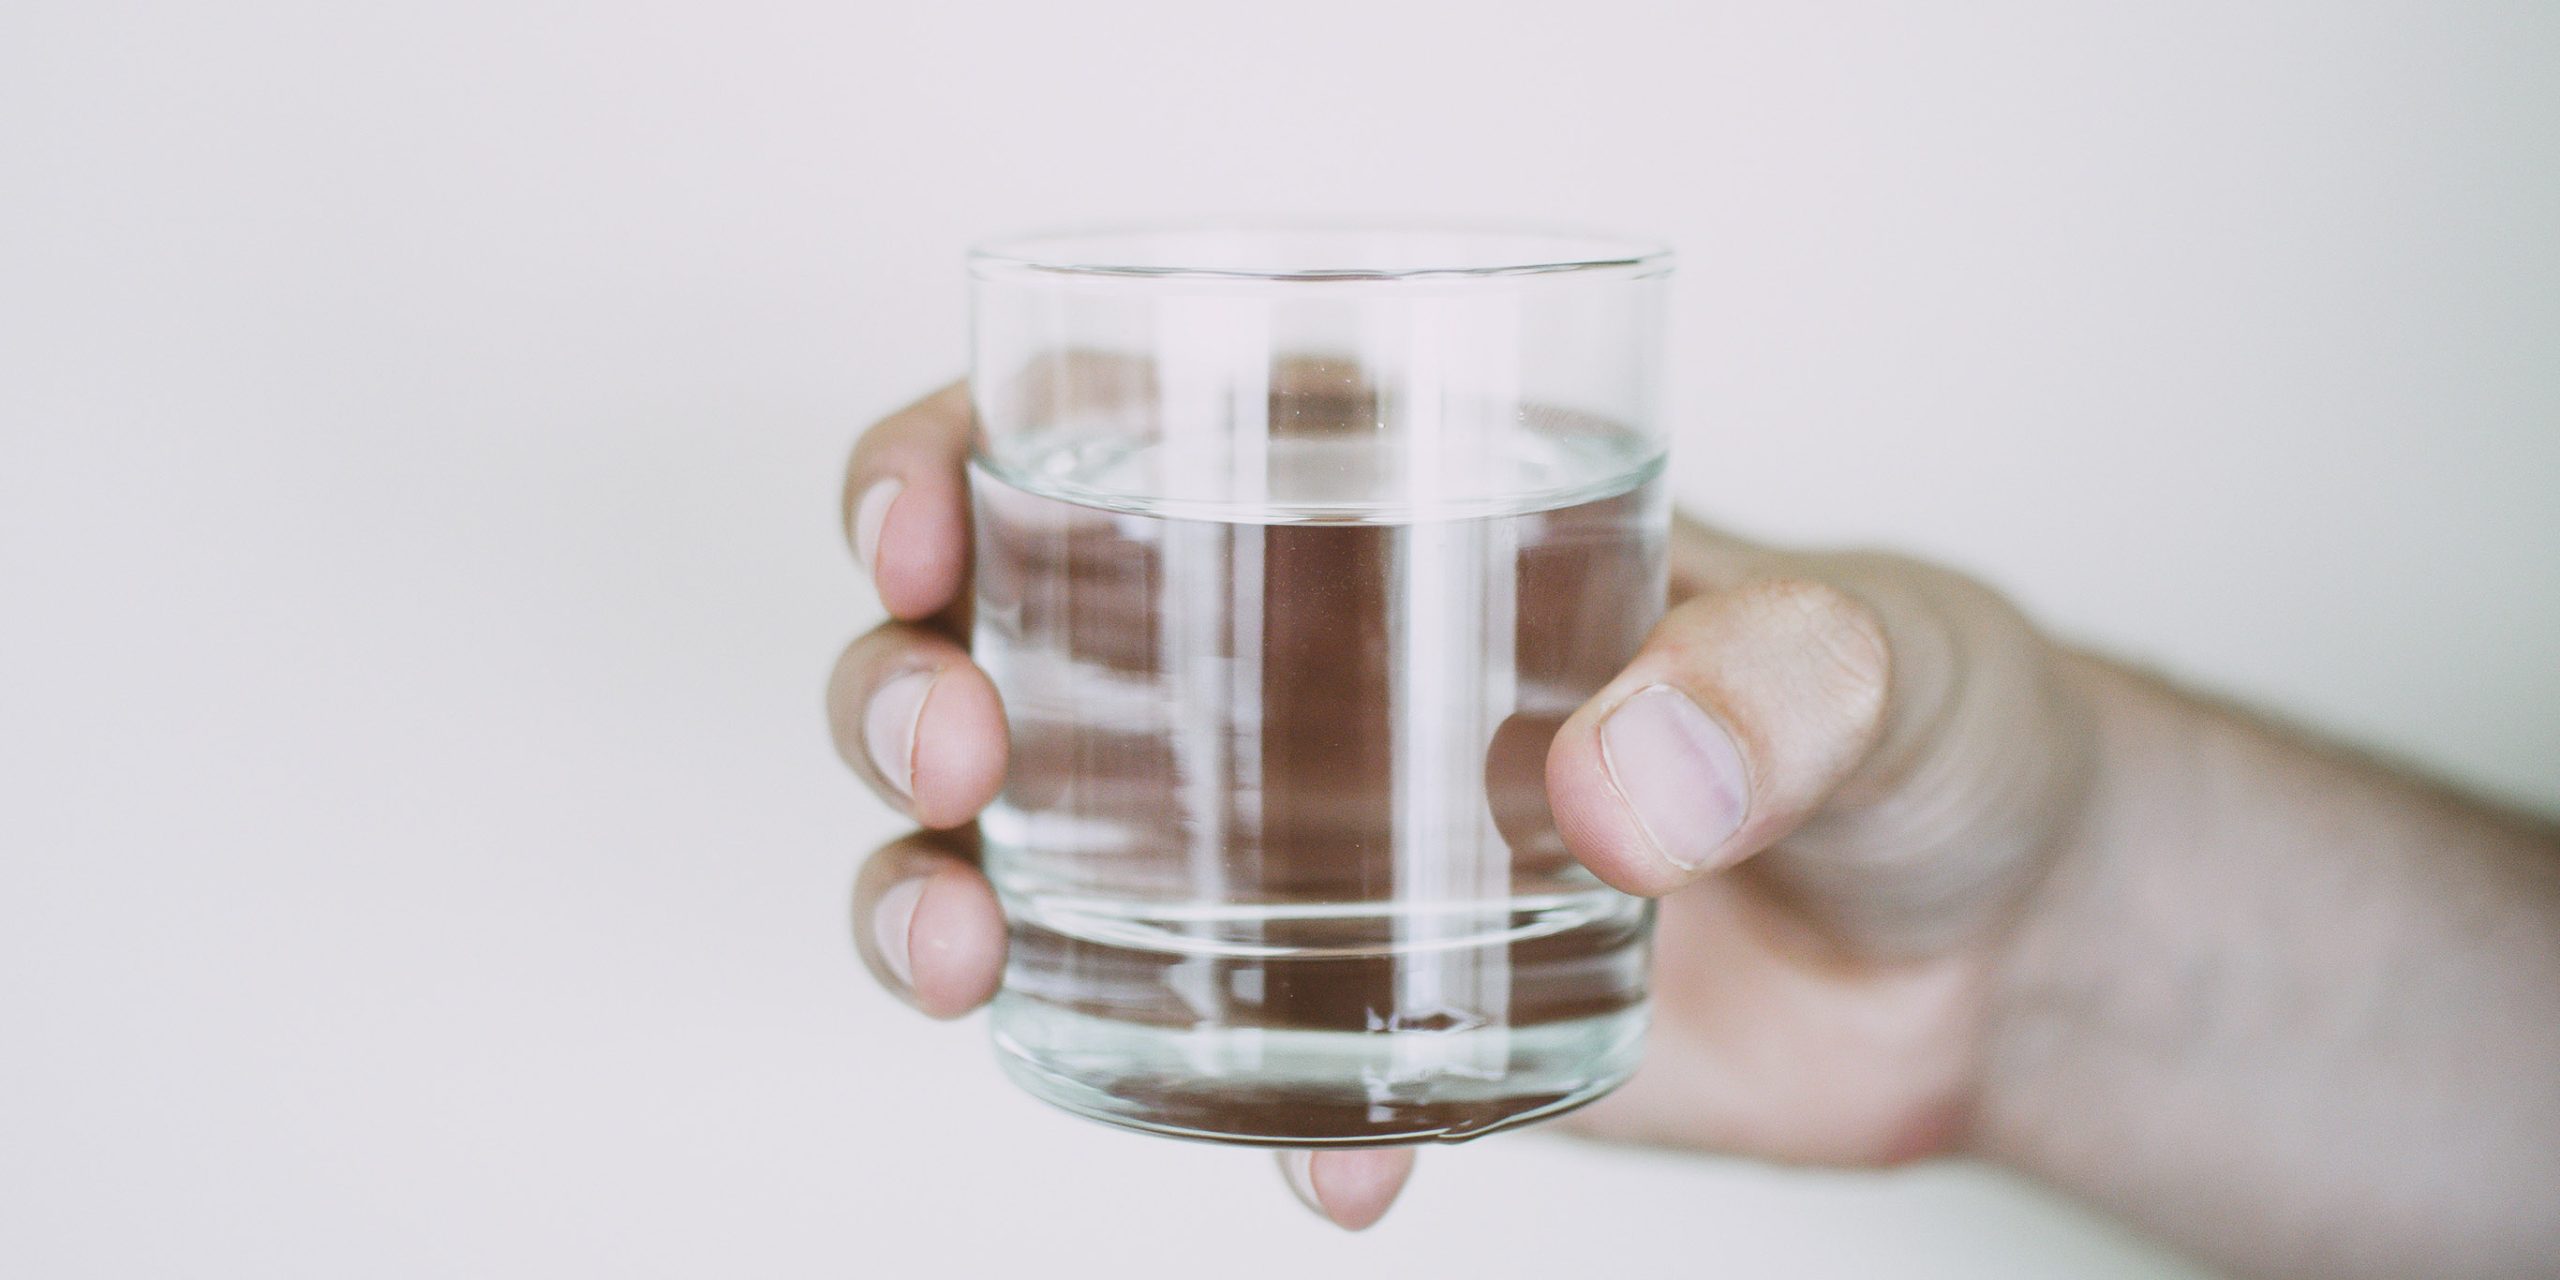 A glass of water for proper hydration